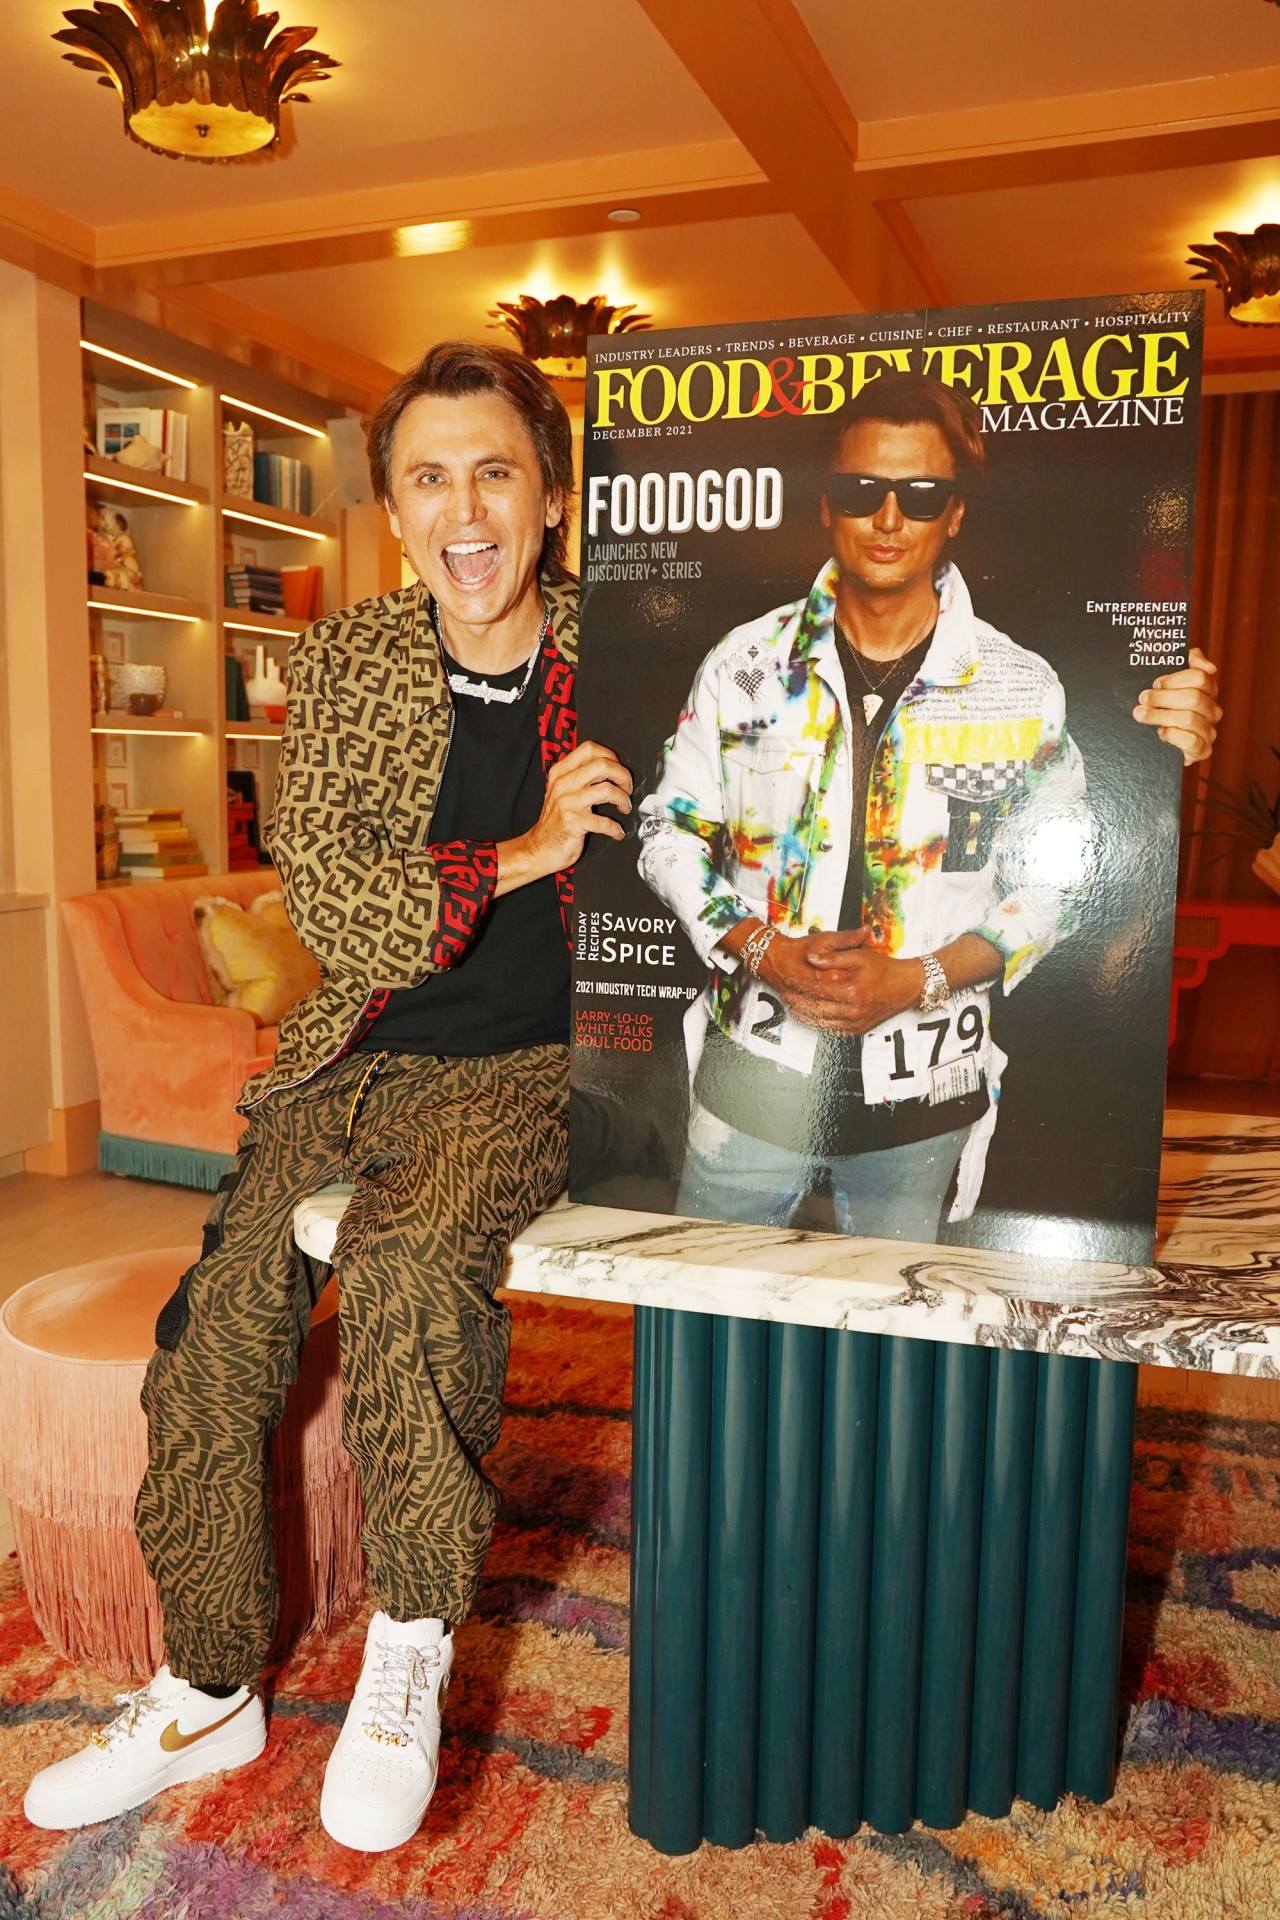 Foodgod Celebrates his Food &#038; Beverage Magazine December Issue Cover at Strawberry Moon